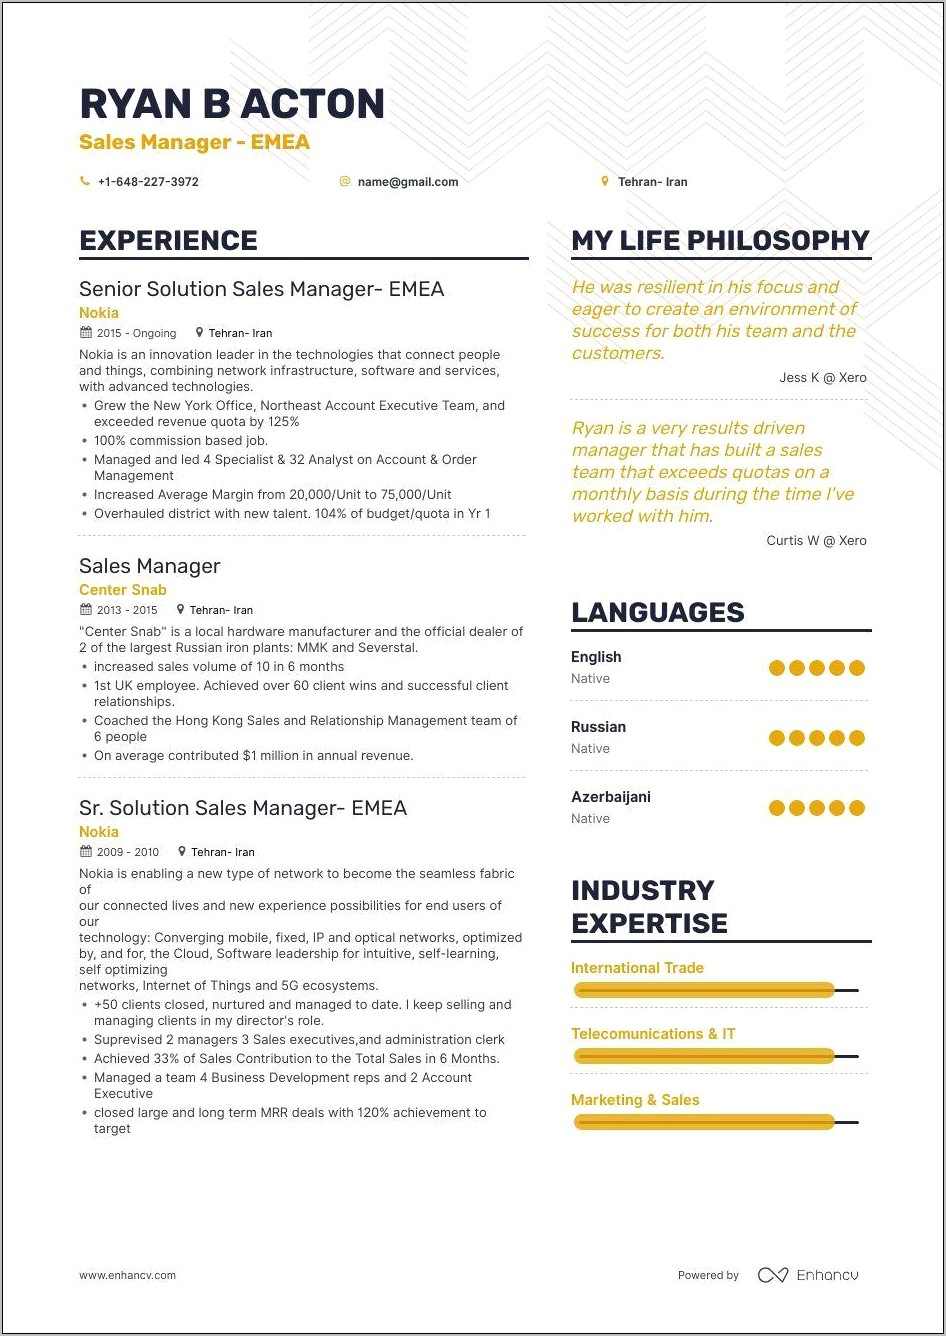 Innovative Resume Examples For Sales Jobs